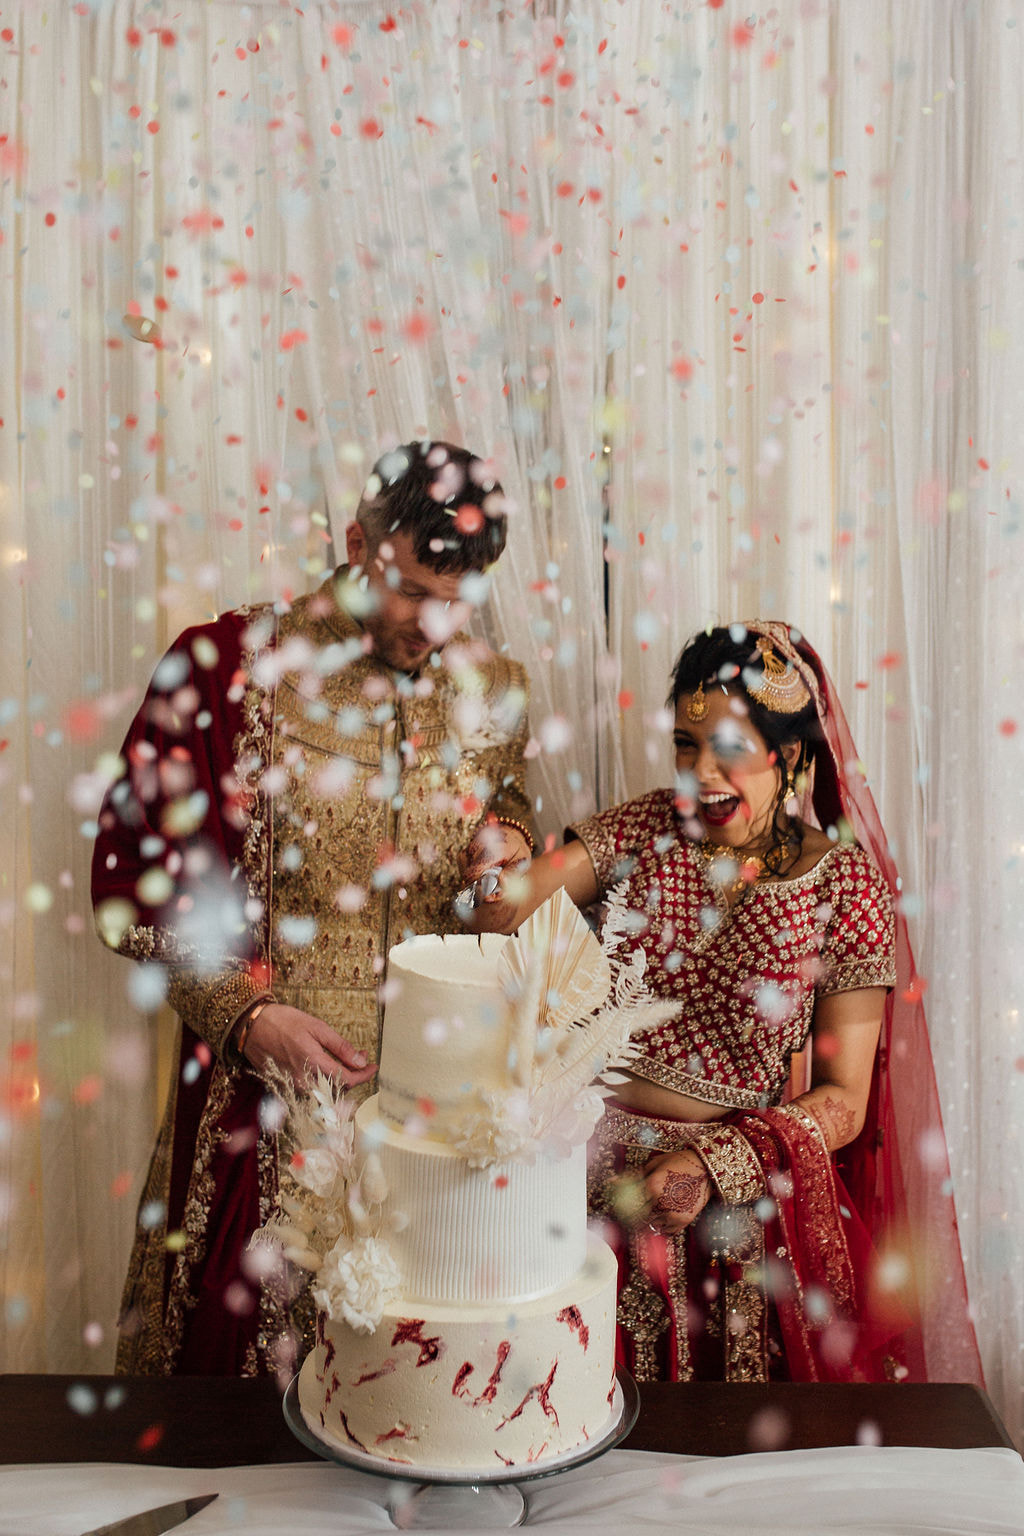 Confetti canons and wedding cake at Indian fusion wedding